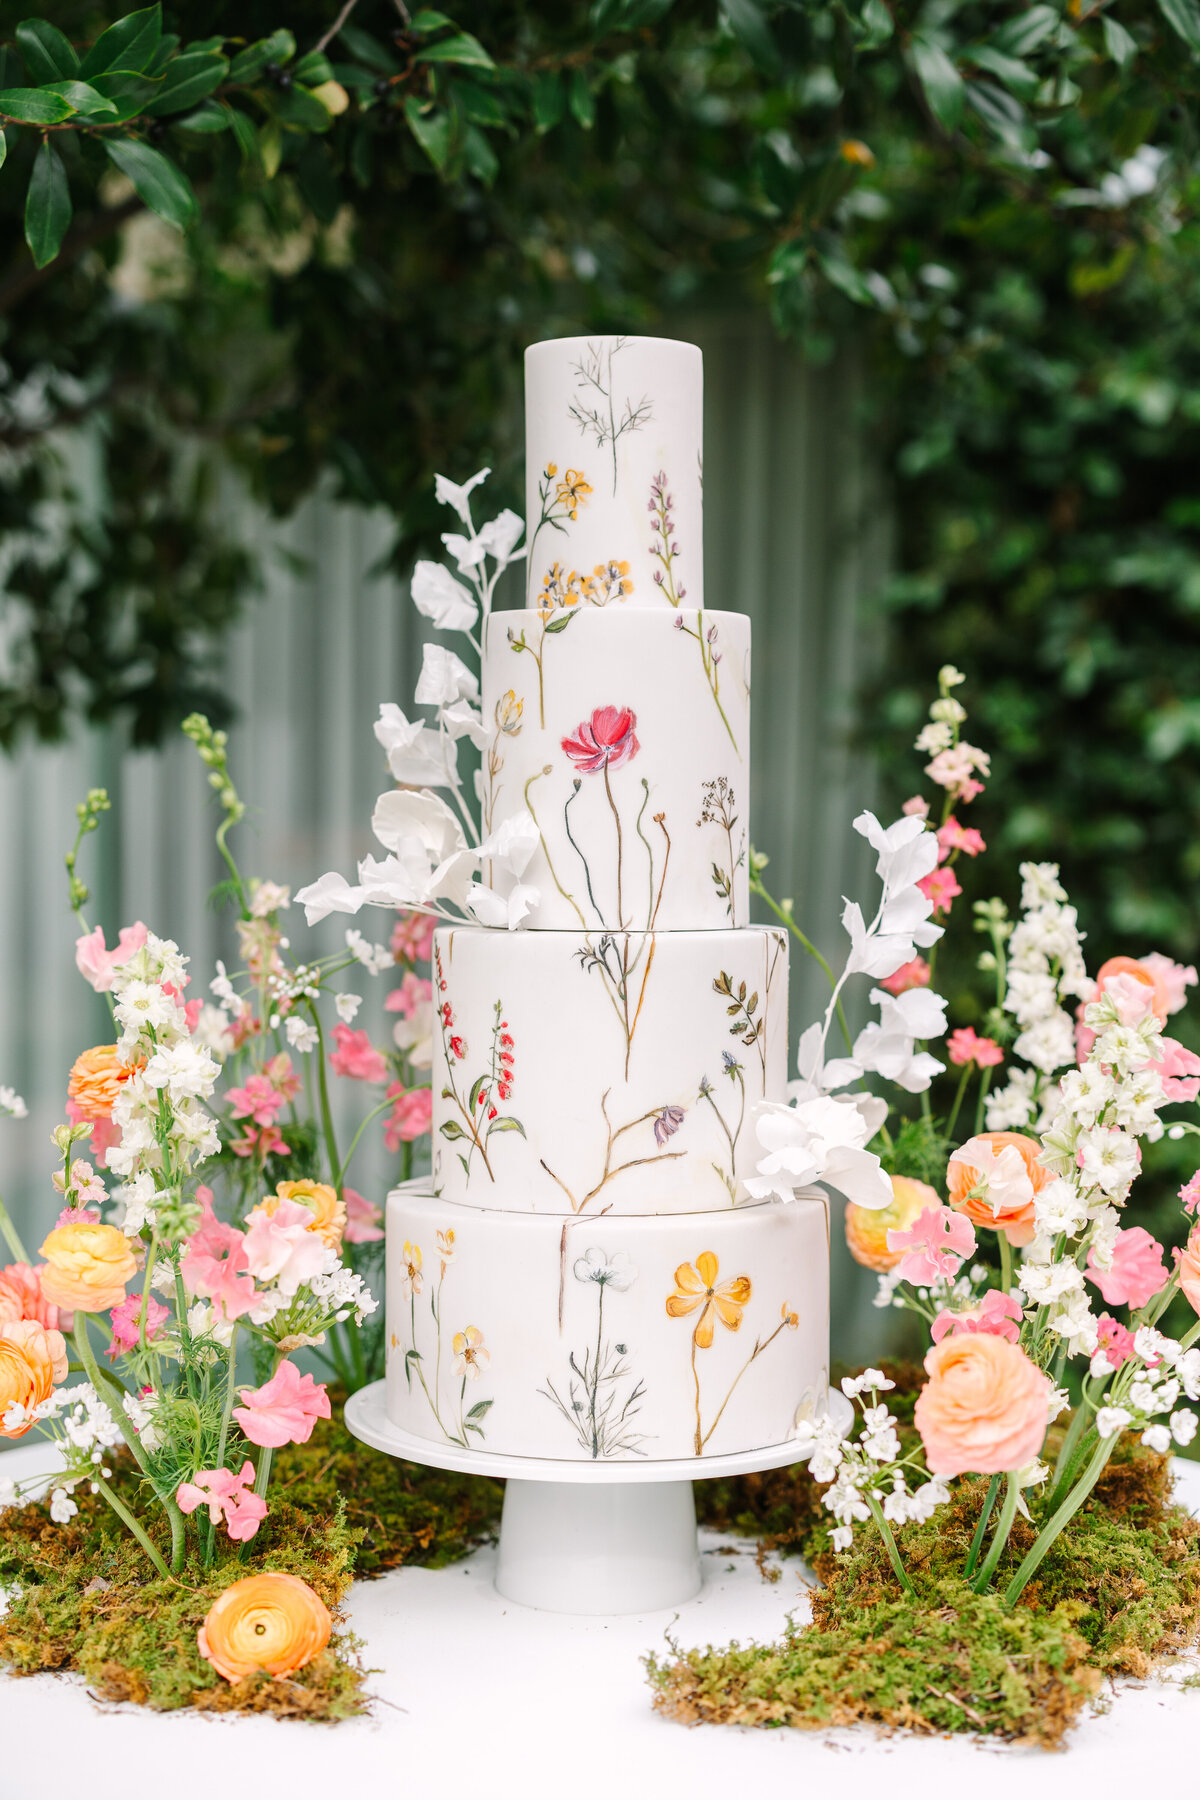 four tier wedding cake decorated with flowers and surrounded by soft pastel florals.